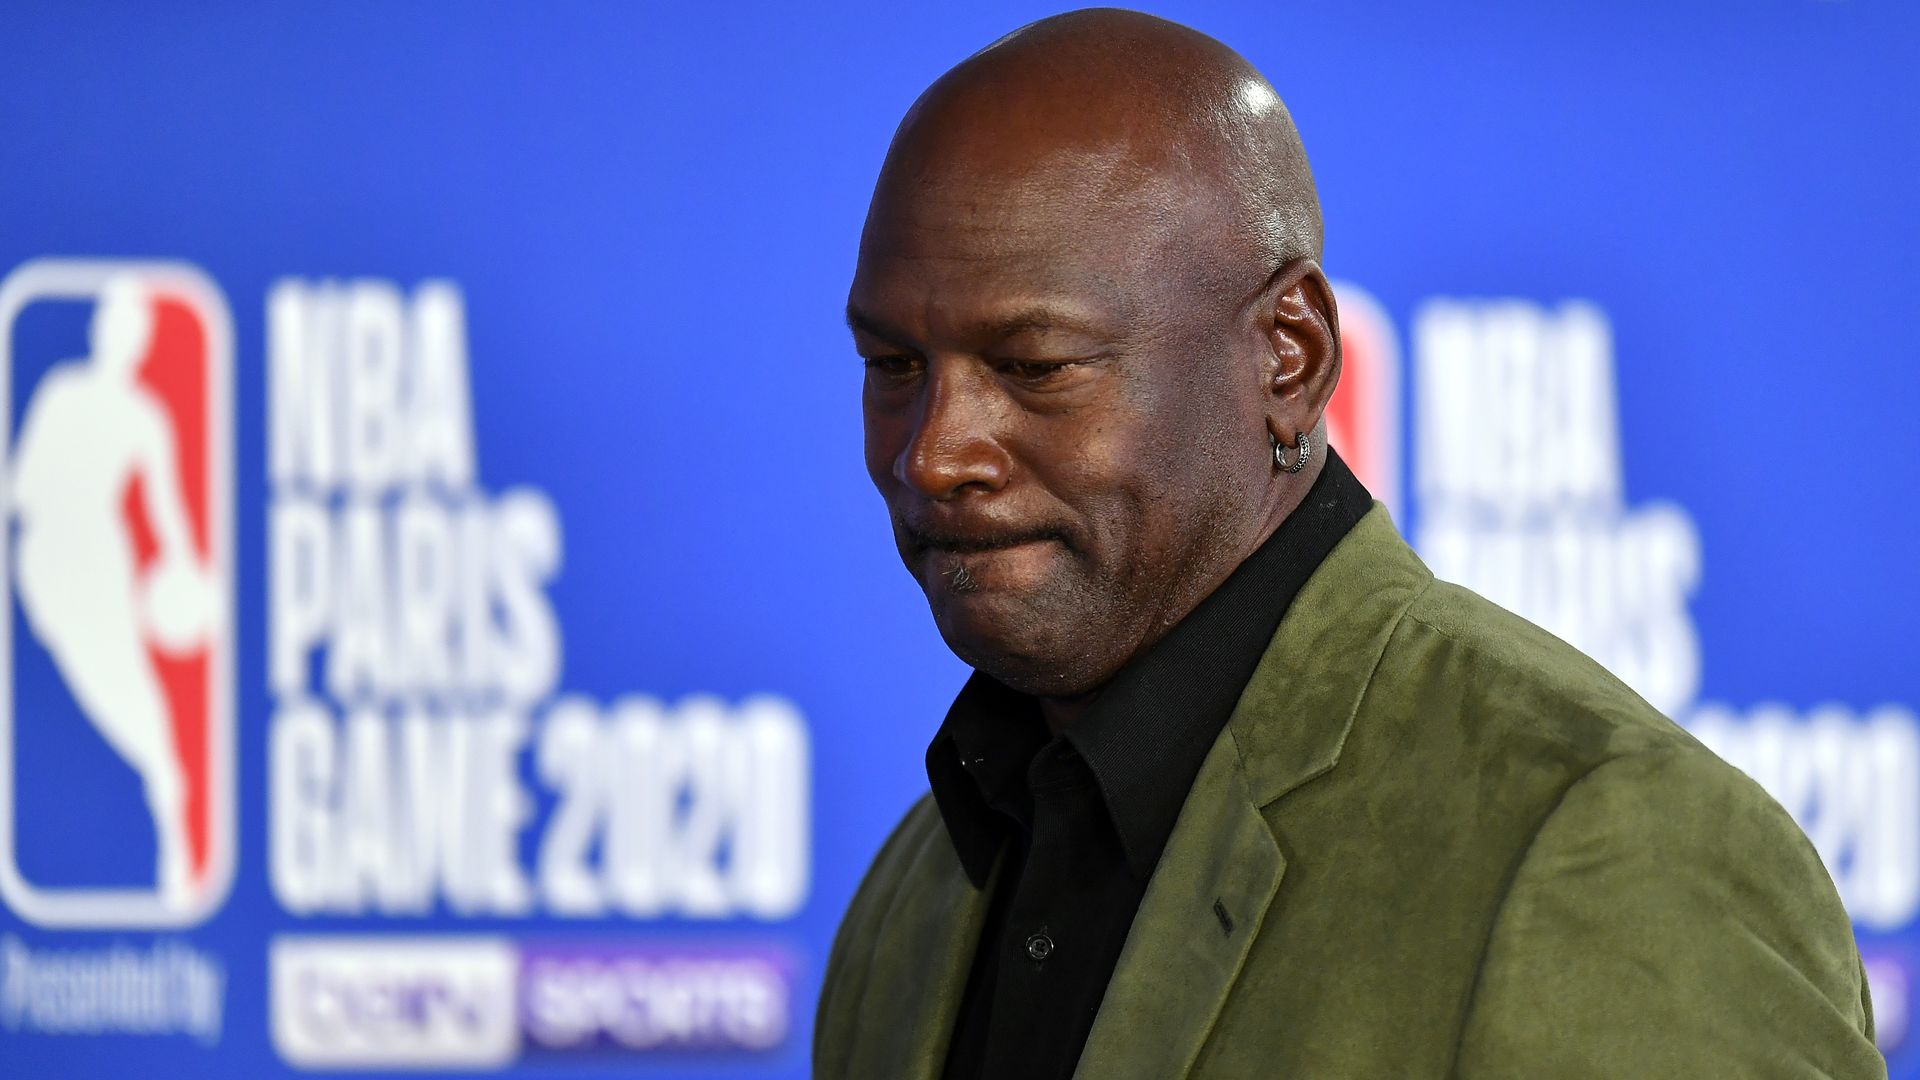 Former Washington Wizards player Michael Jordan at a press conference in January 2020.